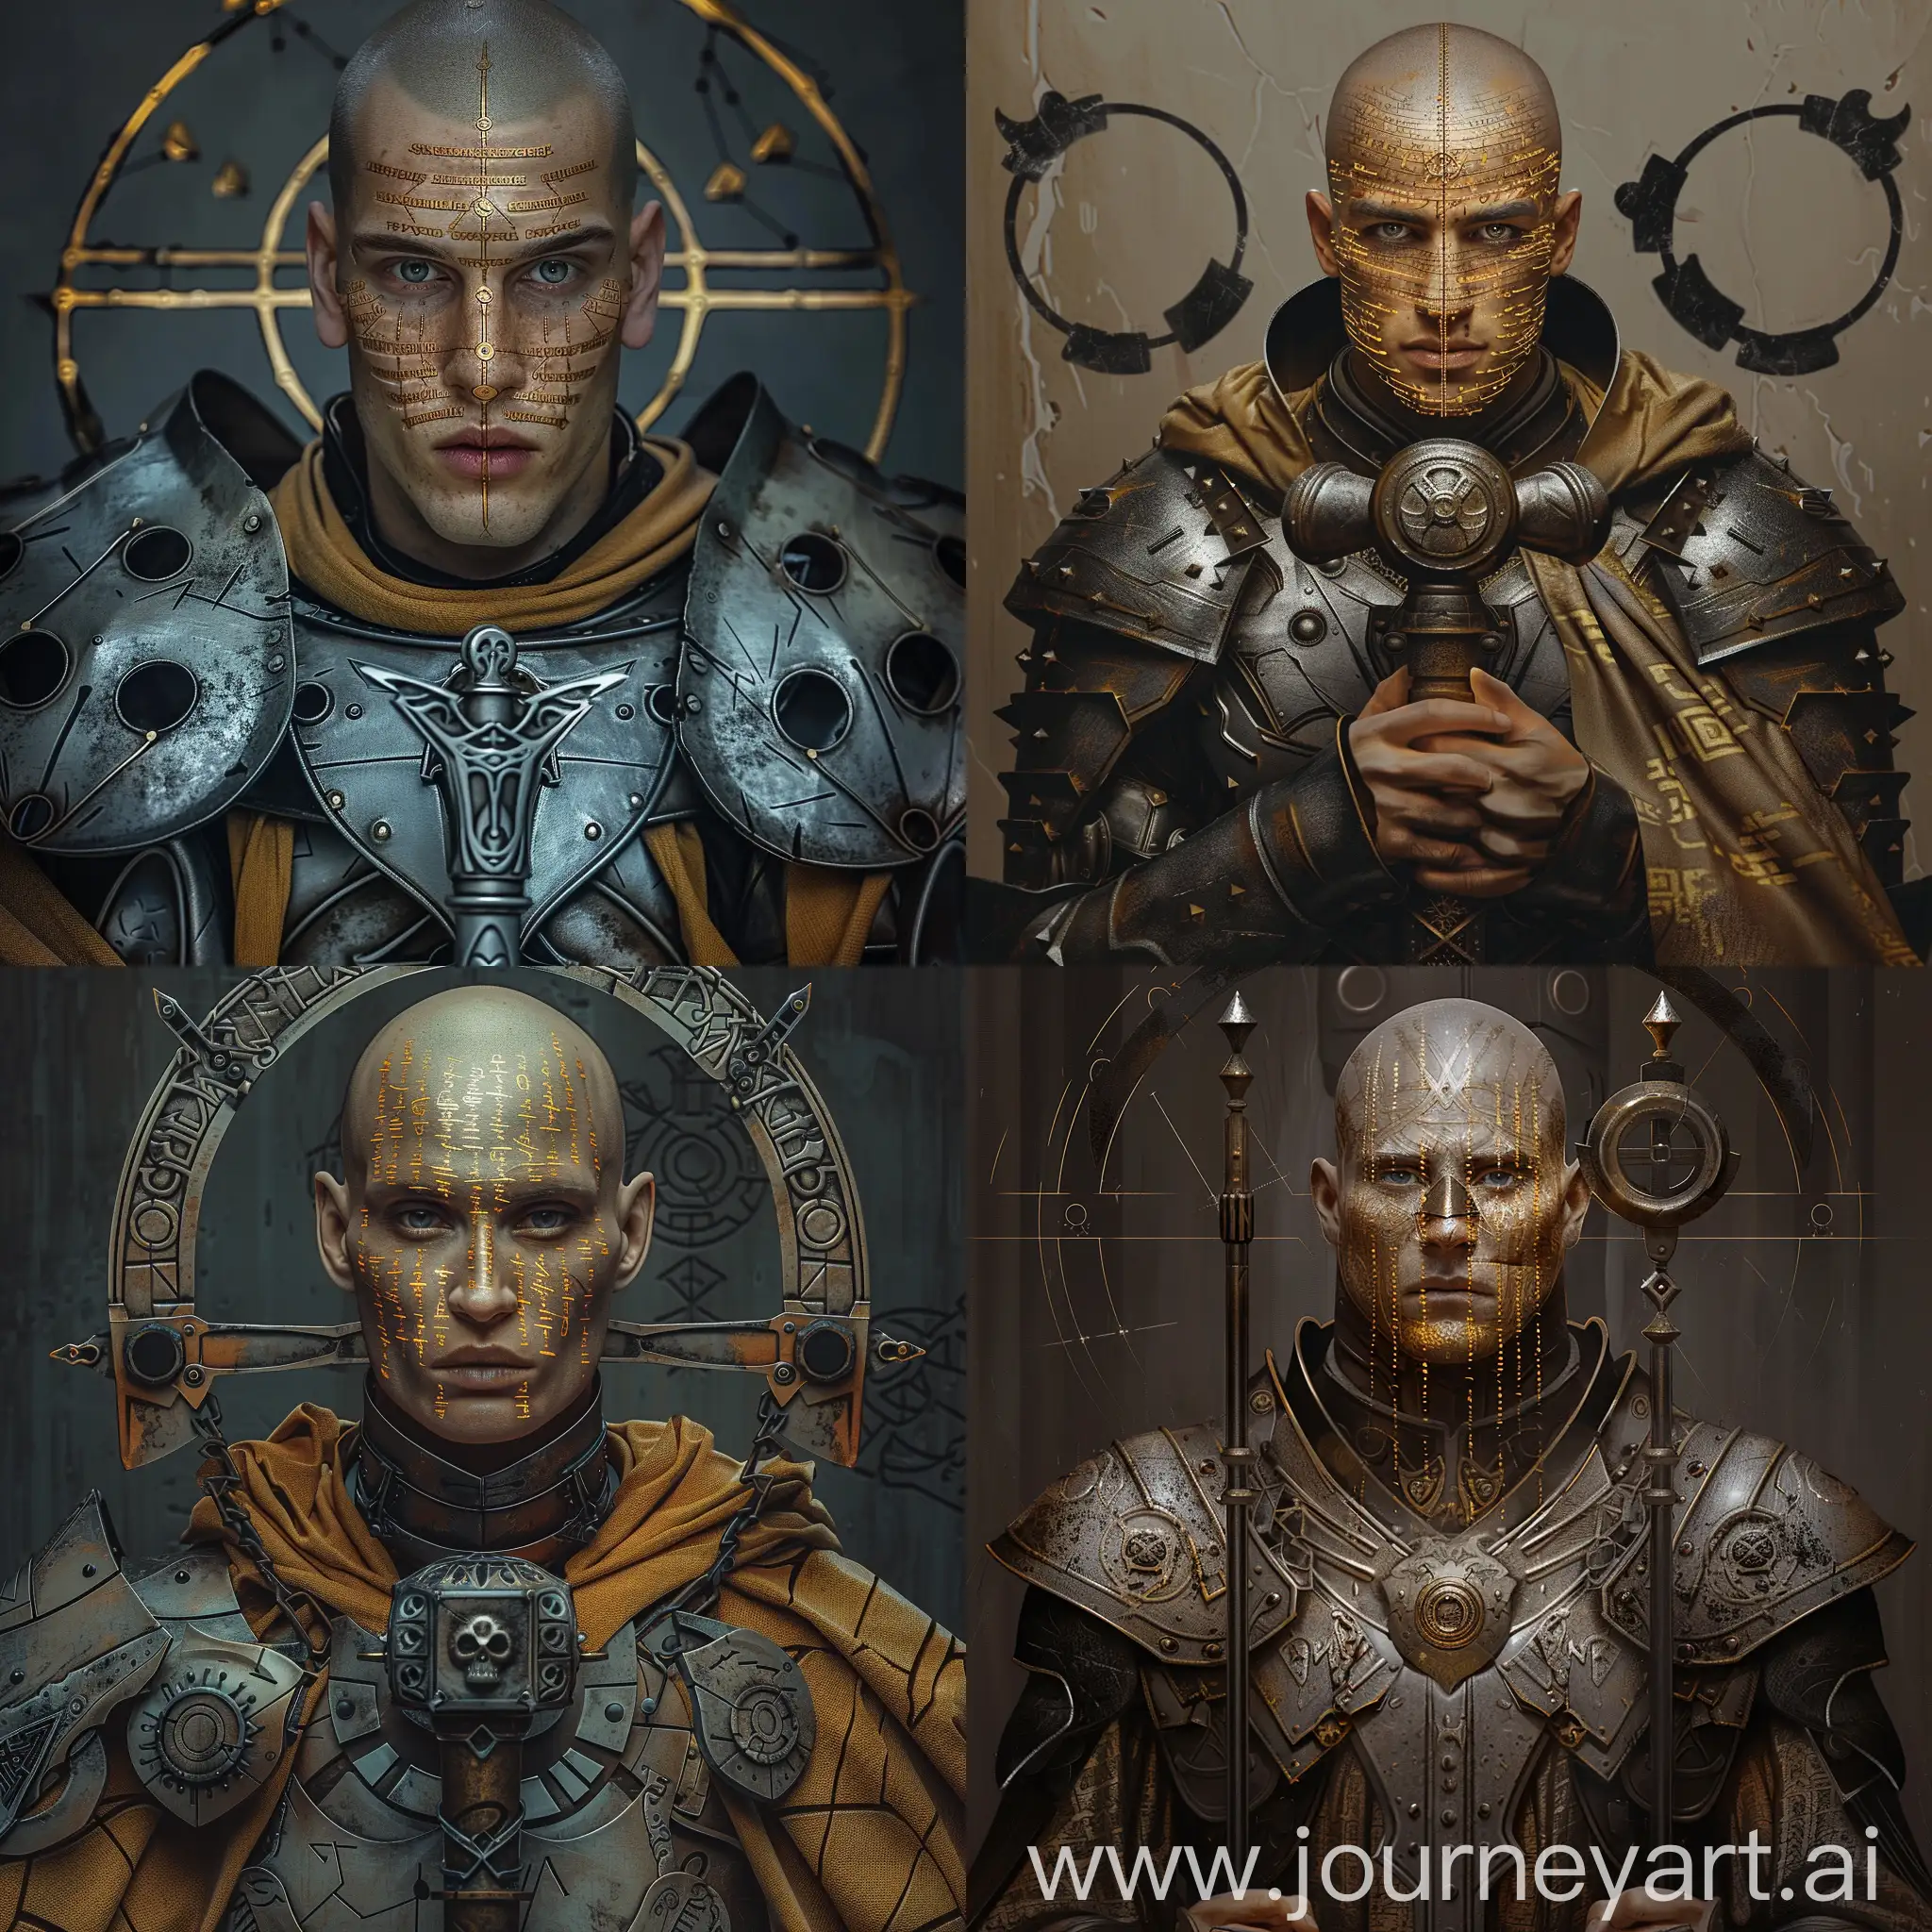 heroic beautiful european man with perfect face features, golden tanned skin, lines of golden text on his face, muscular, completely bald and shaved, grey eyes, medieval priest robes mixed with armor plates, symmetrical, holding huge two handed ceremonial flanged mace, symmetrical mace, dark circles and lines engraved on armor